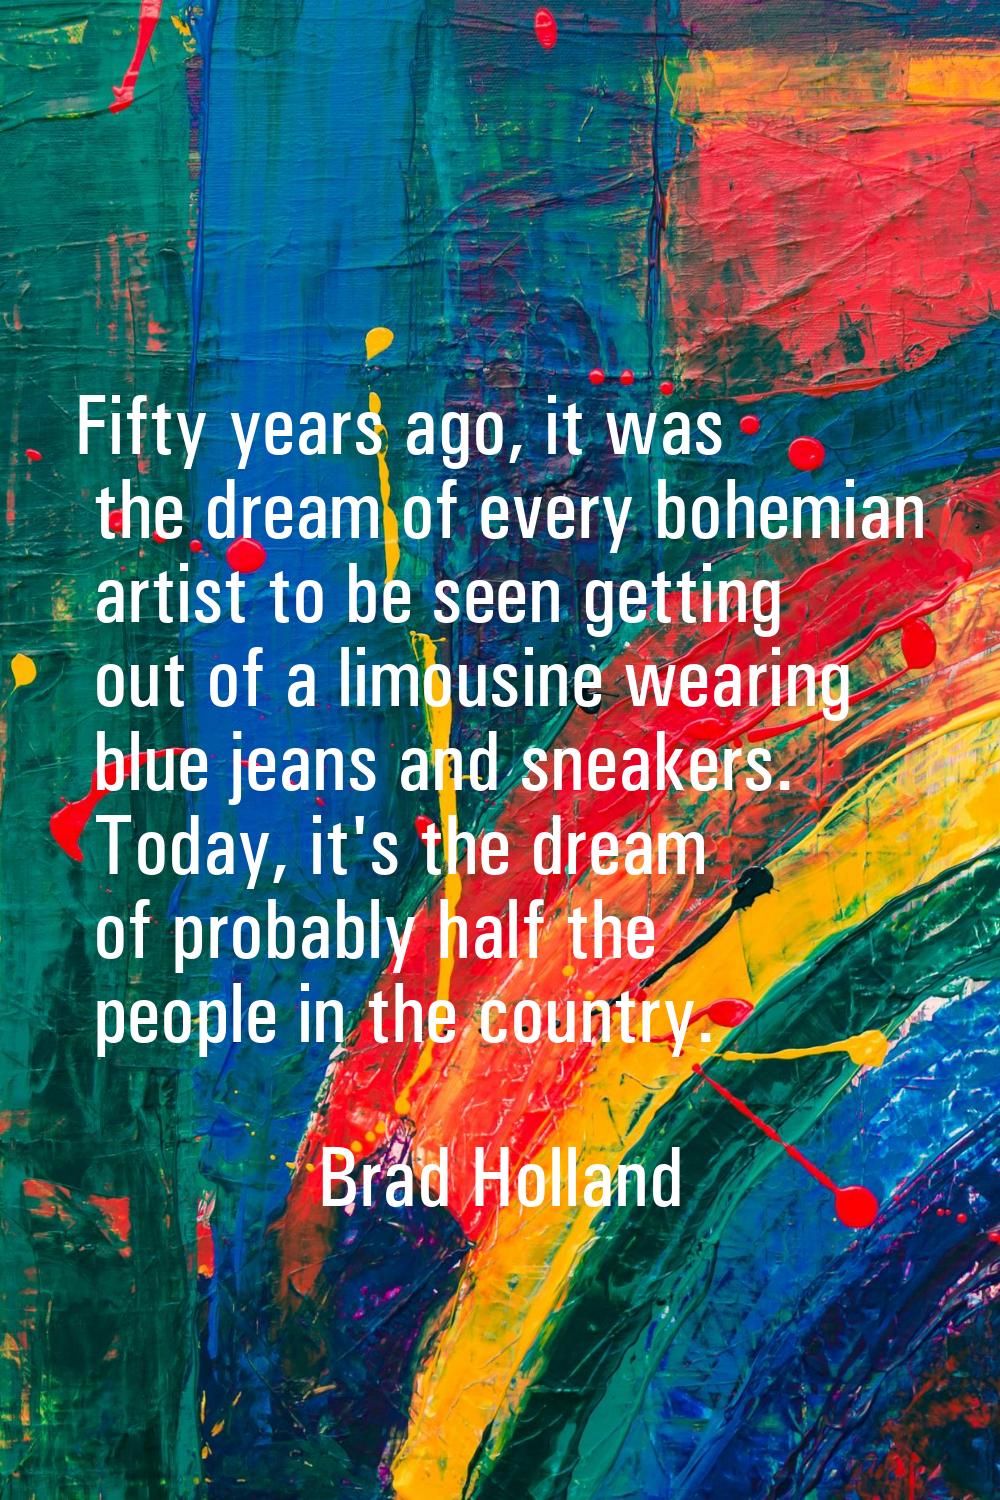 Fifty years ago, it was the dream of every bohemian artist to be seen getting out of a limousine we